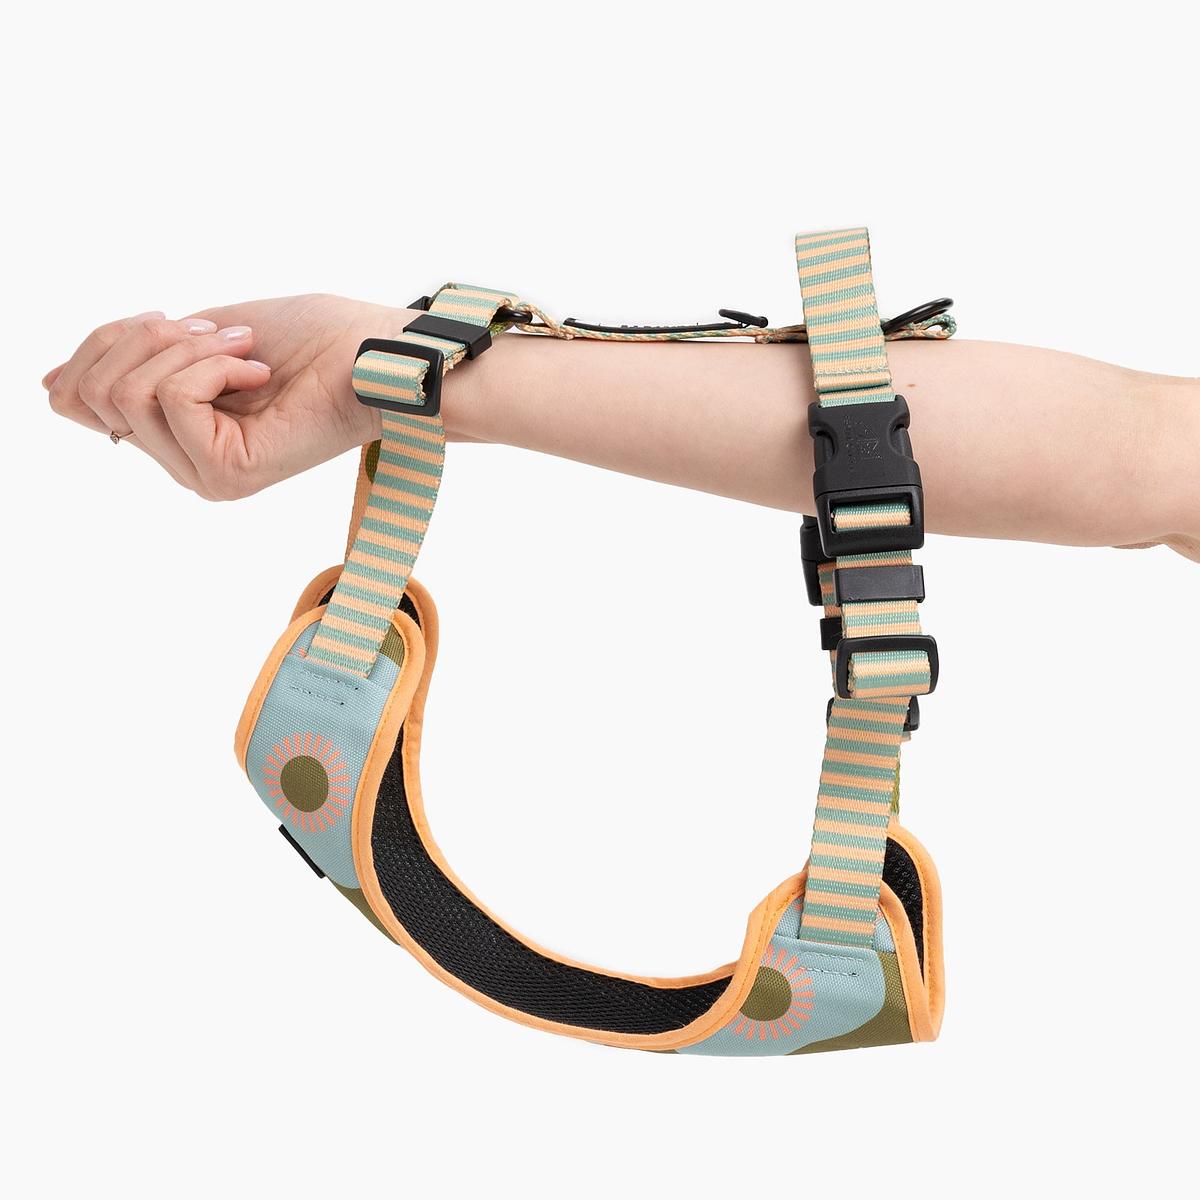 Stay-on pressure-free harness "Sausage dog"